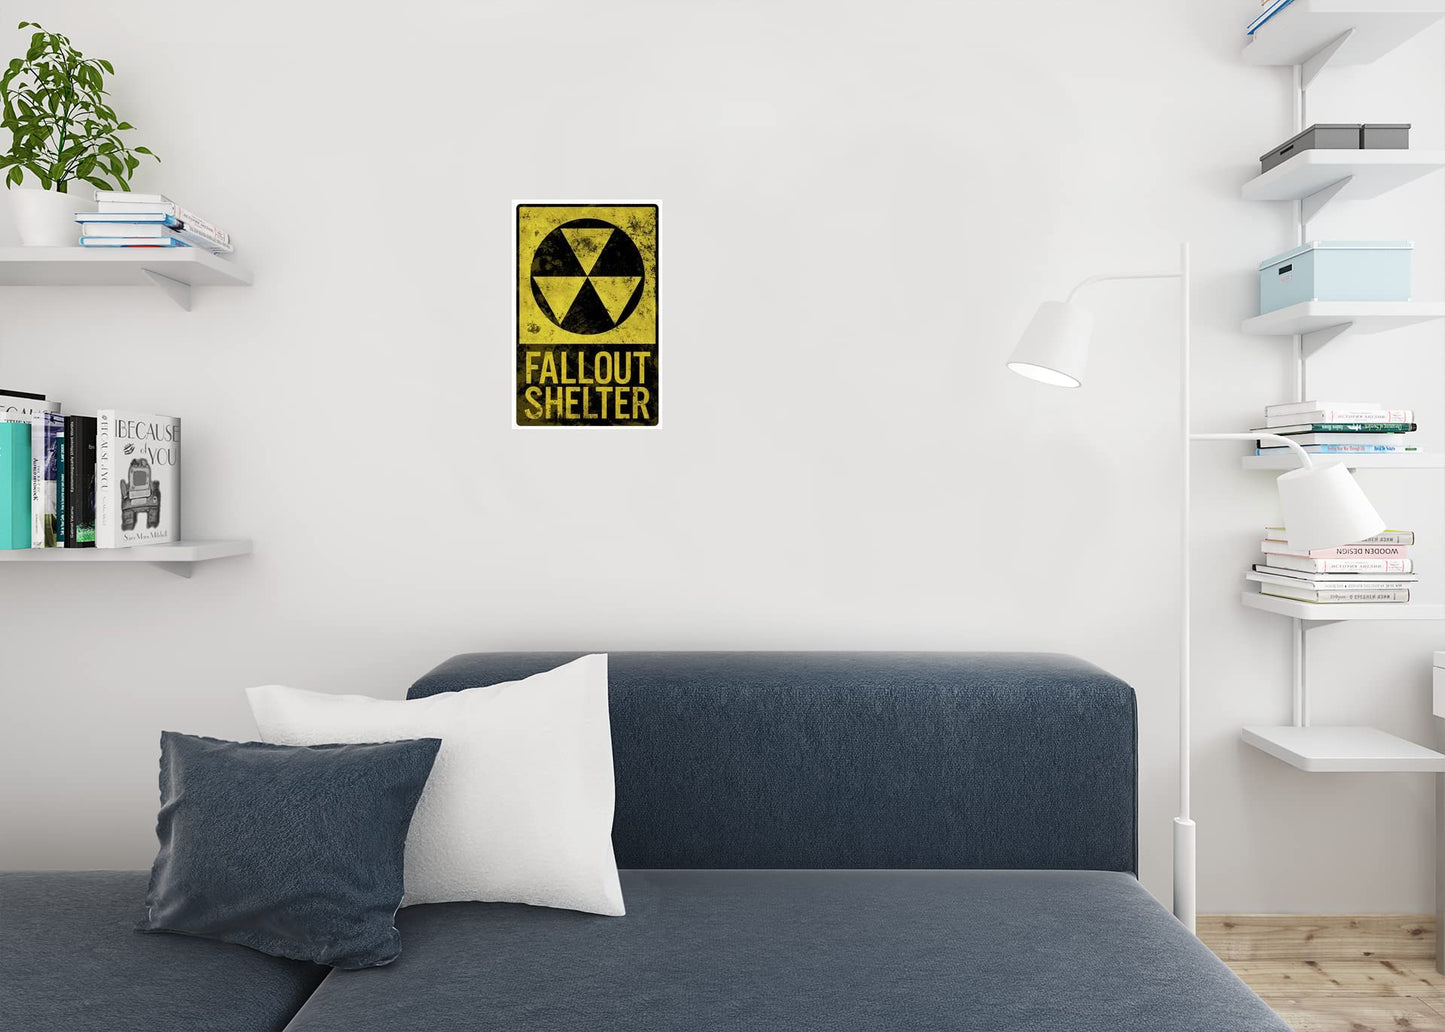 Fallout Shelter Vintage Style Sign Cool Wall Decor Art Print Poster 12x18